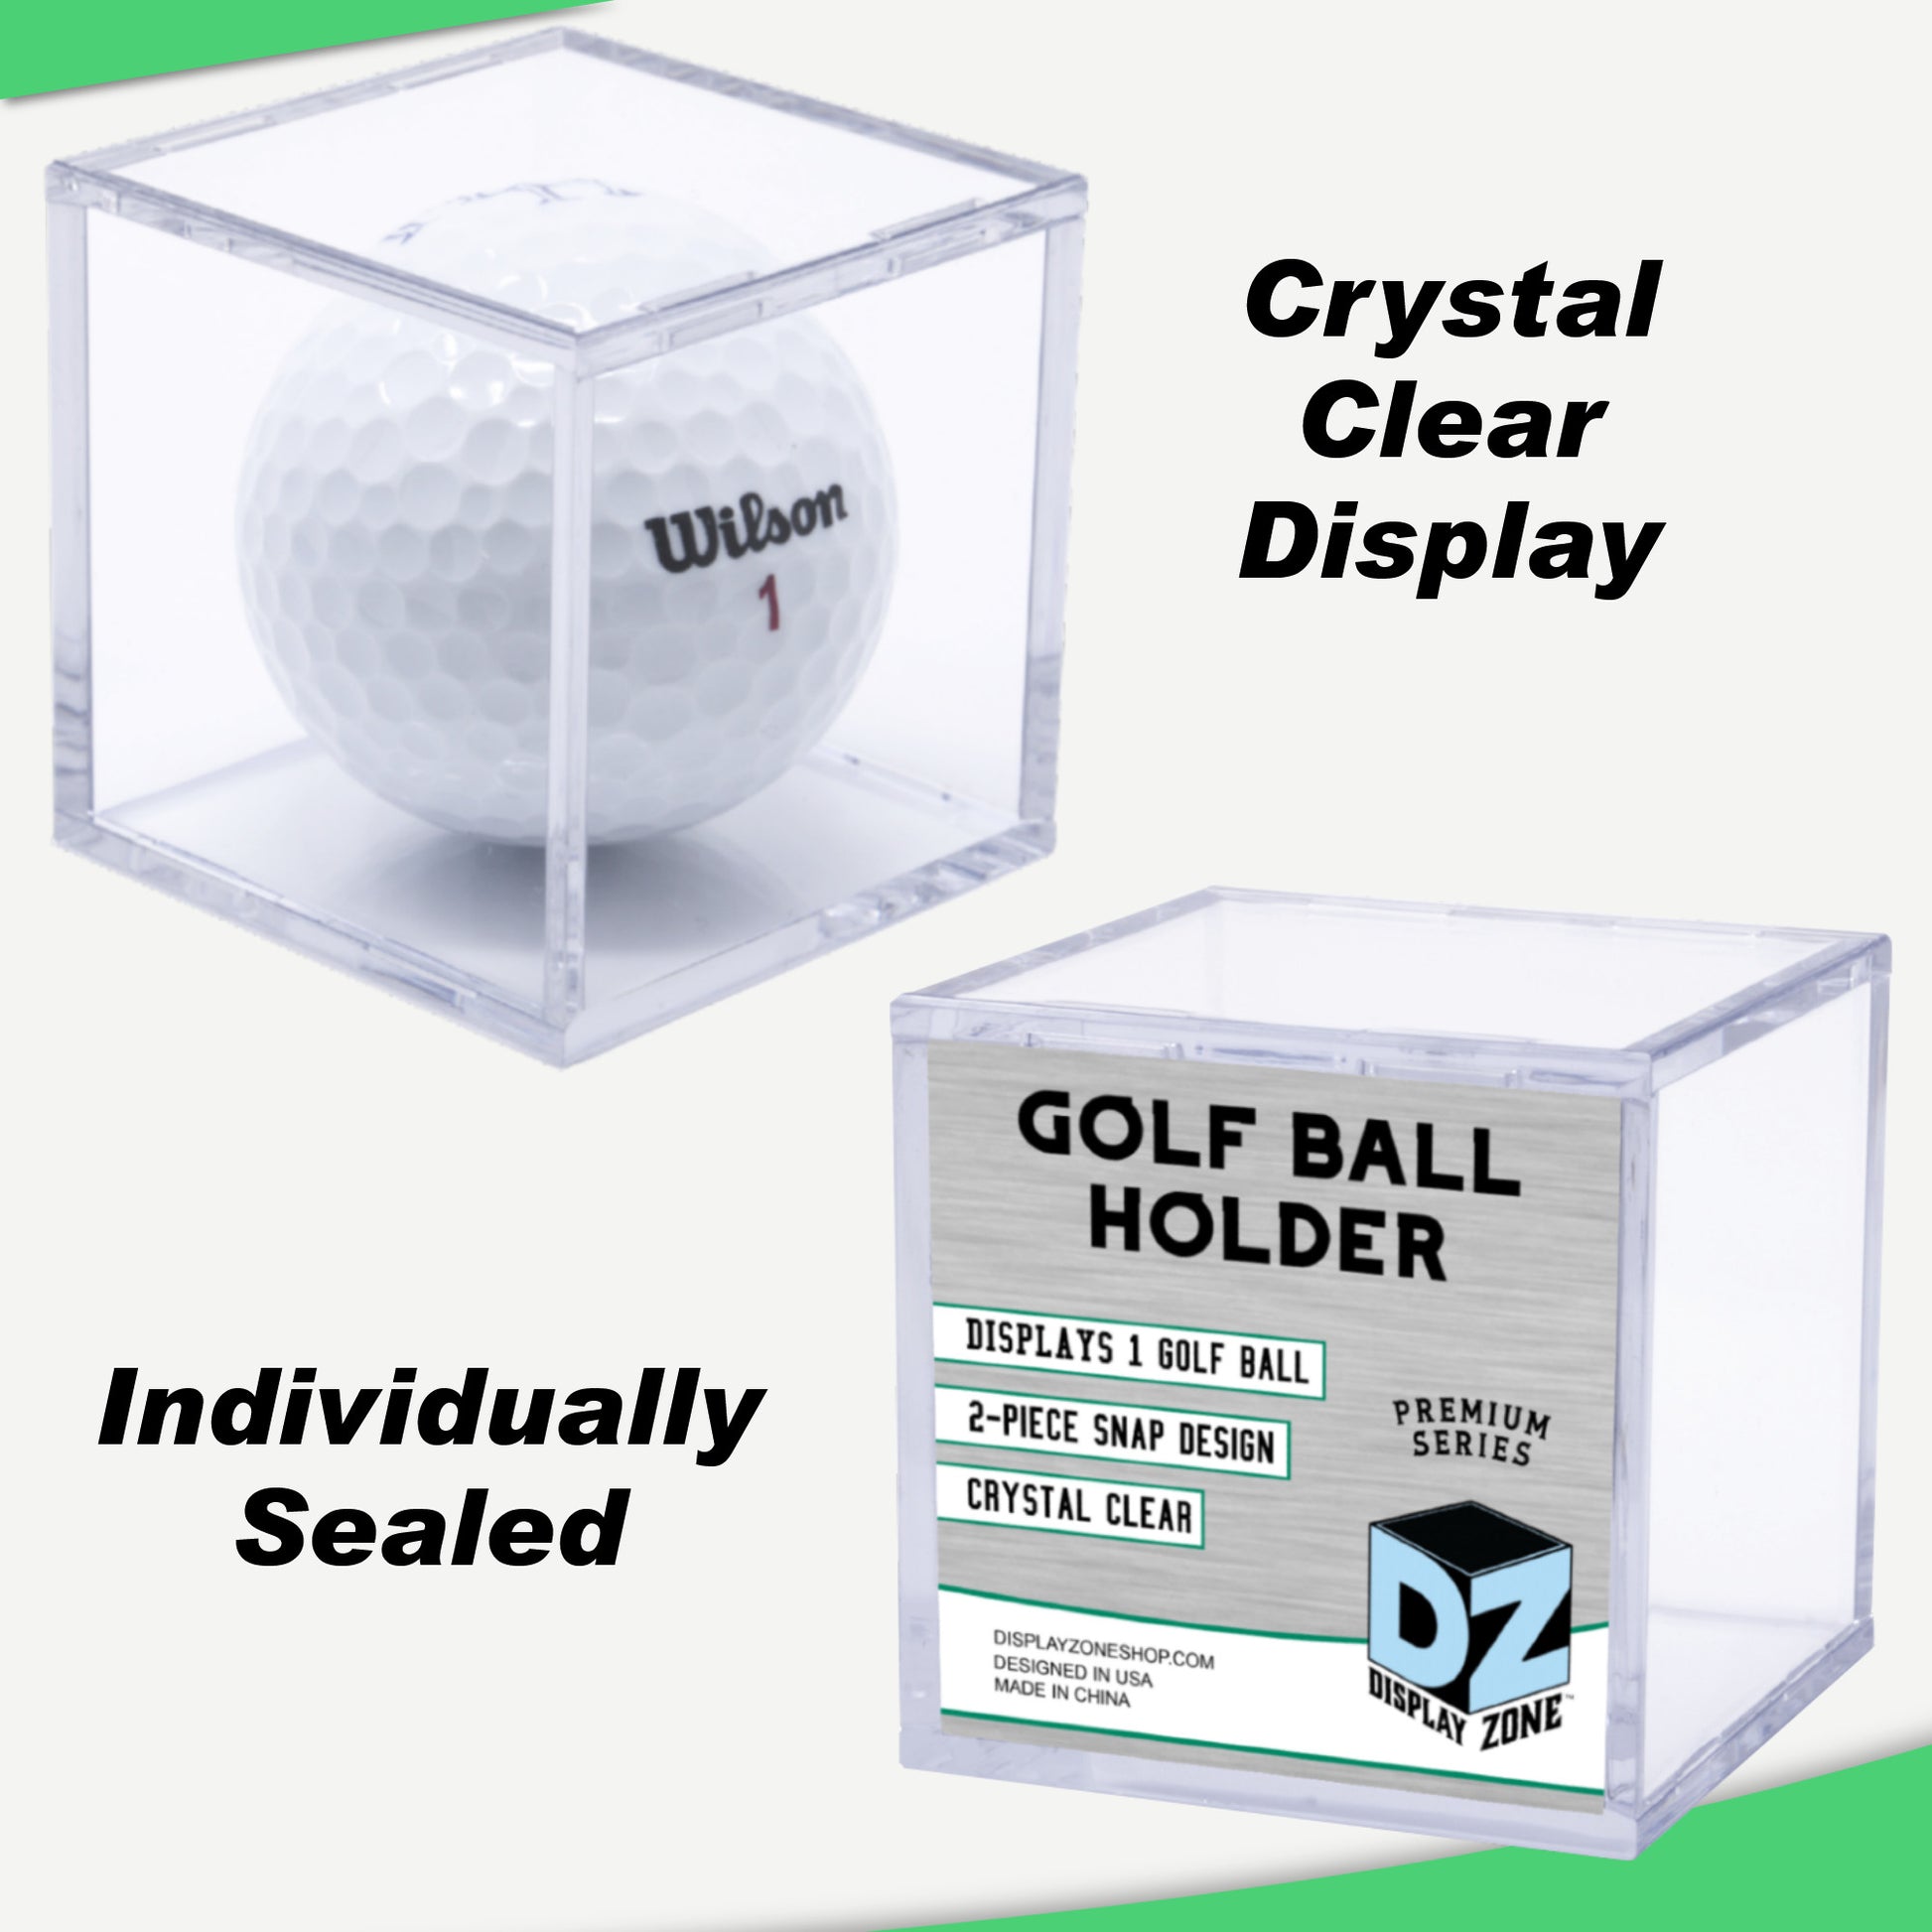 Golf Displays for Retail, Golf Product Display Stands